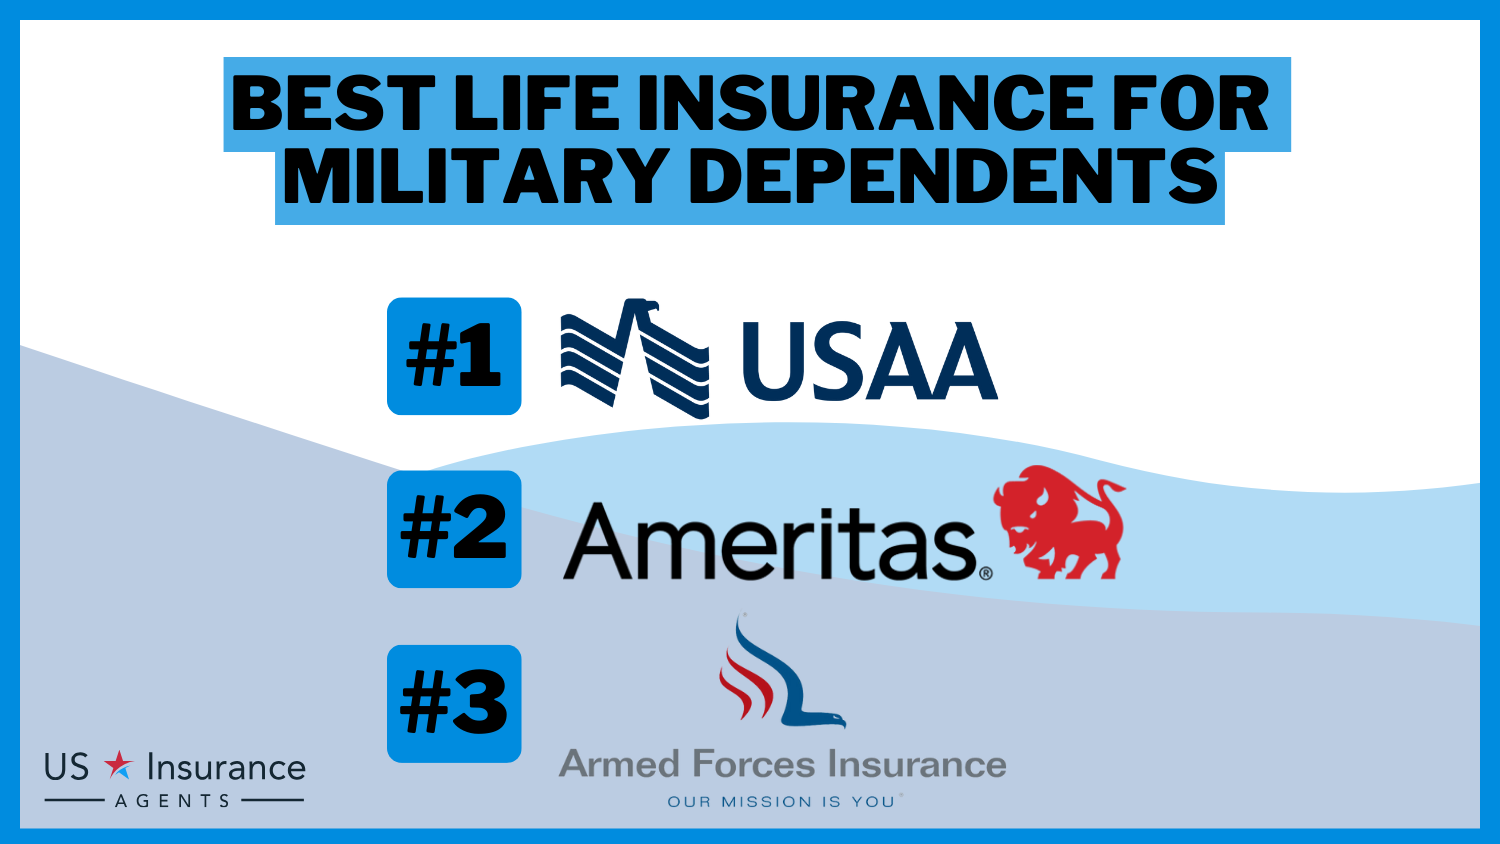 3 Best Life Insurance For Military Dependents-USIA: USAA, Ameritas, and Armed Forces Insurance.